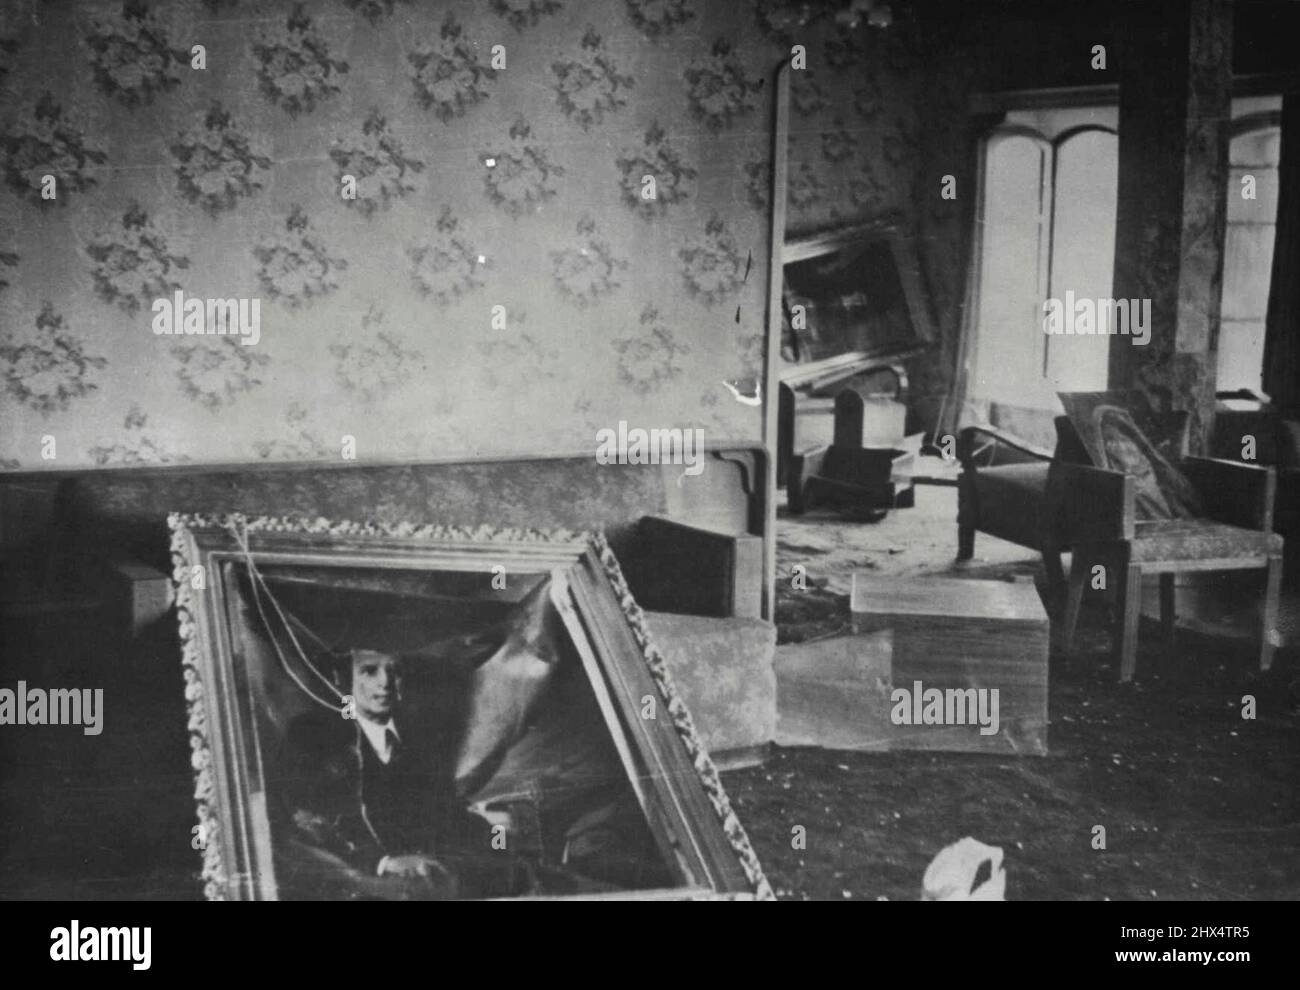 The Embassy of Pakistan and Pakistan Ambassador's residence in Kabul was raided and looted on March 30th. The damage done in the drawing room of the Ambassador's House. Quaid-Azam's oil painting was also damaged. June 6, 1955. Stock Photo